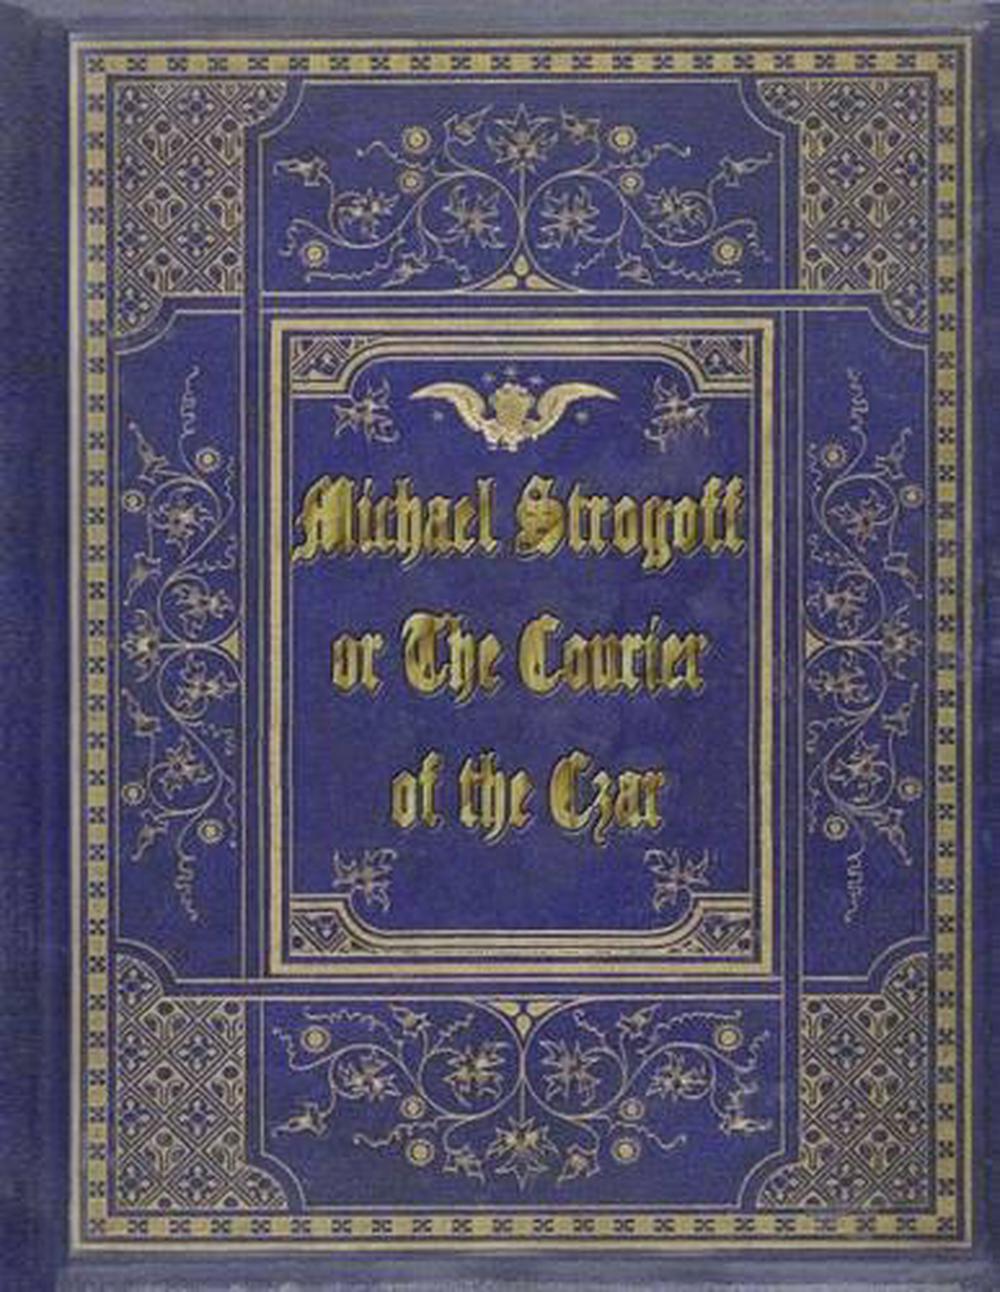 michael strogoff the courier of the czar